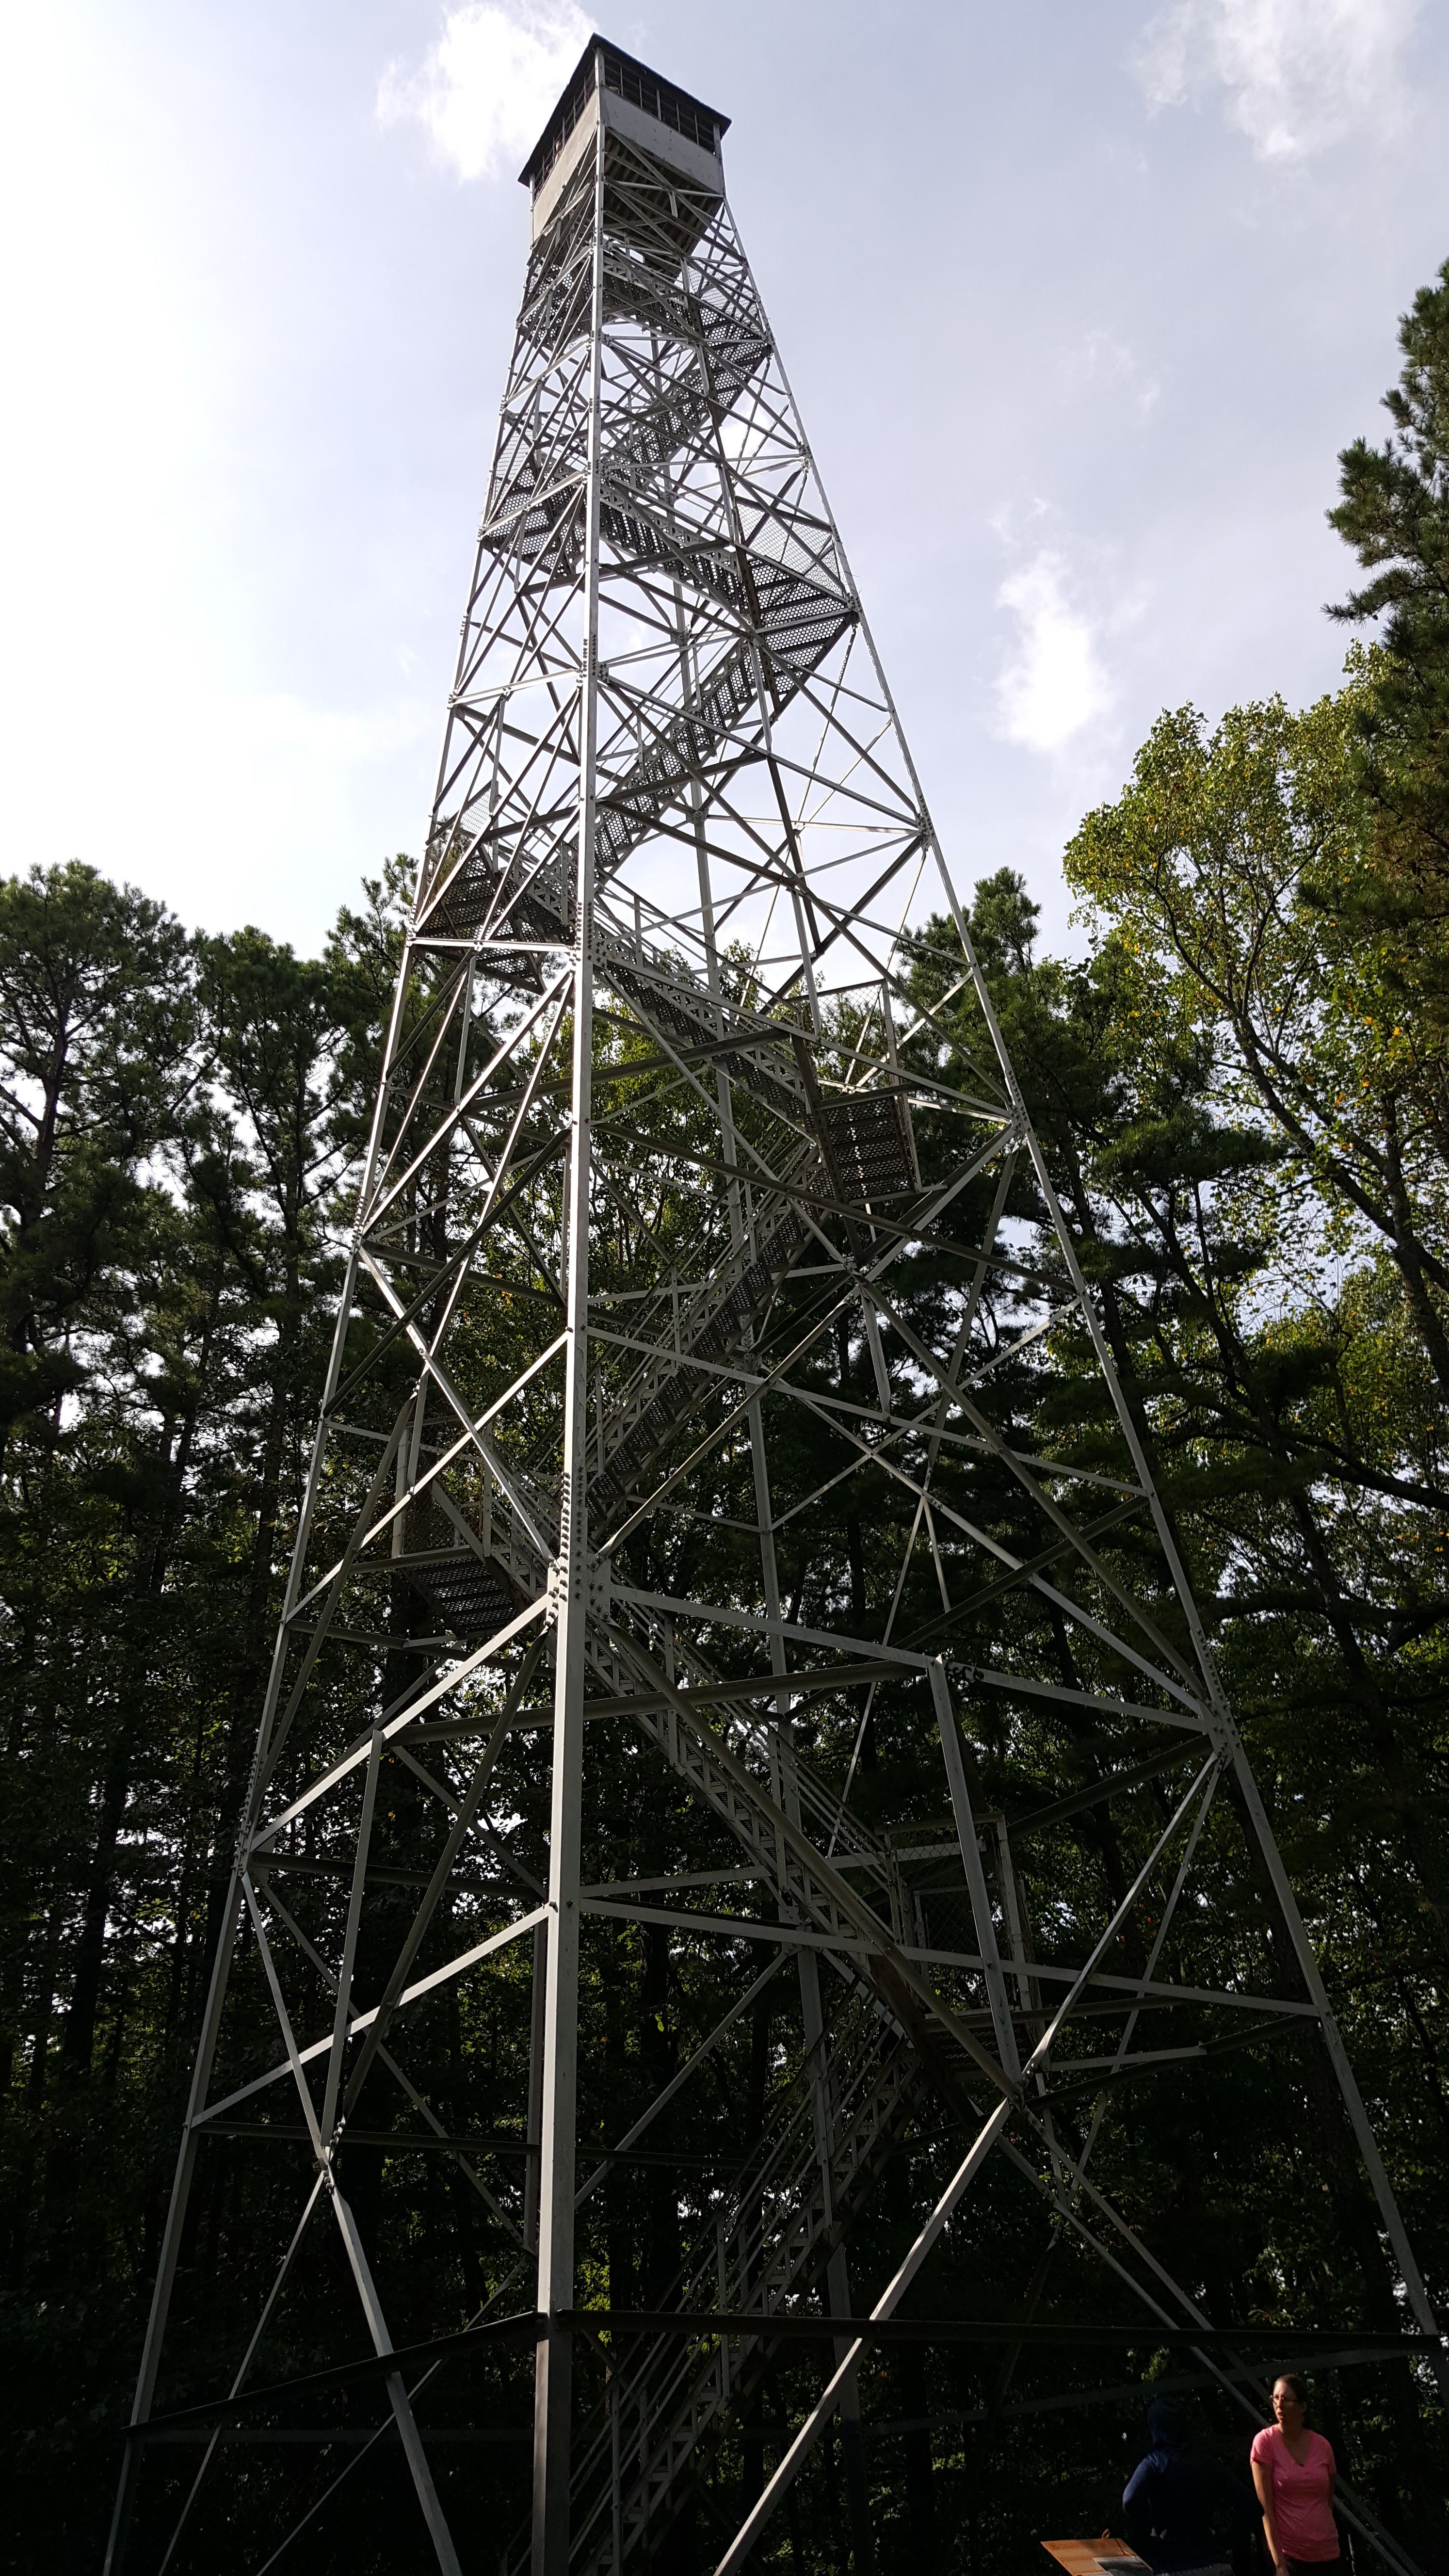 Fire tower that we hiked up to see the view.